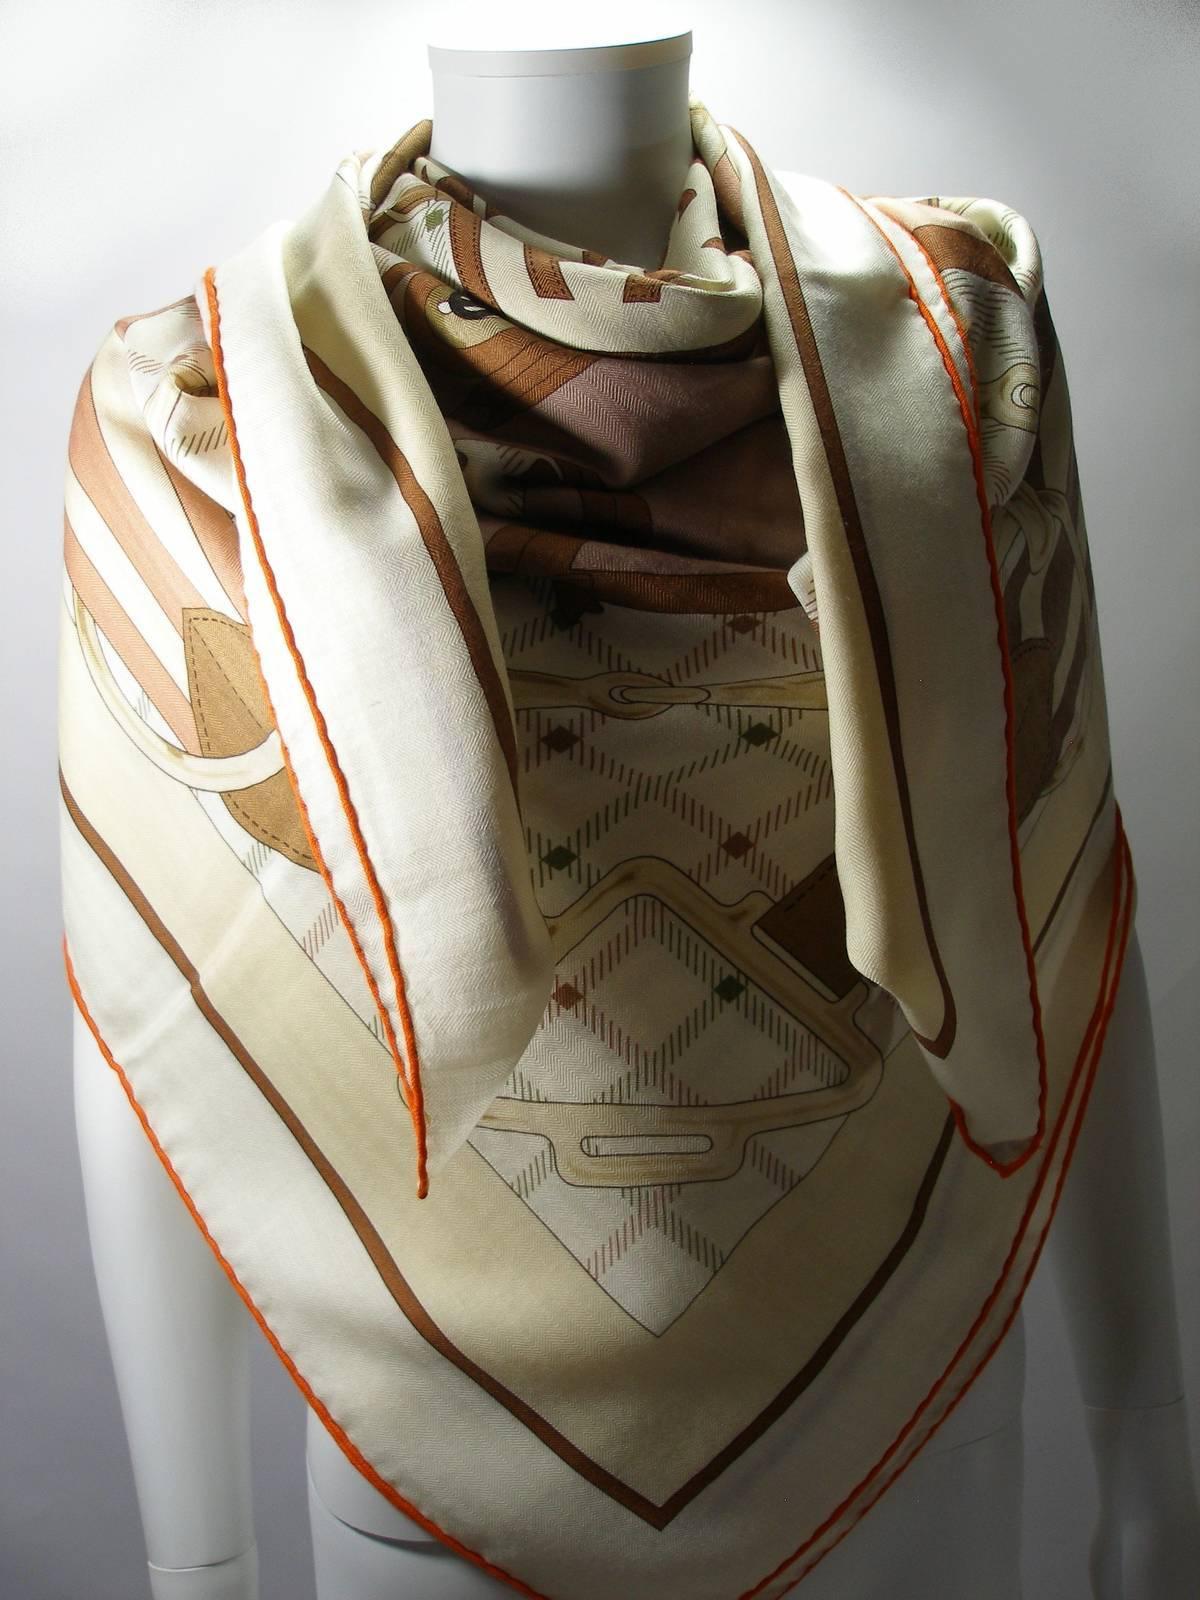 Hermès 140cm or 55 Inch GM Shawl Tatersale By Henri d'Origny Cashmere Brand New For Sale 2